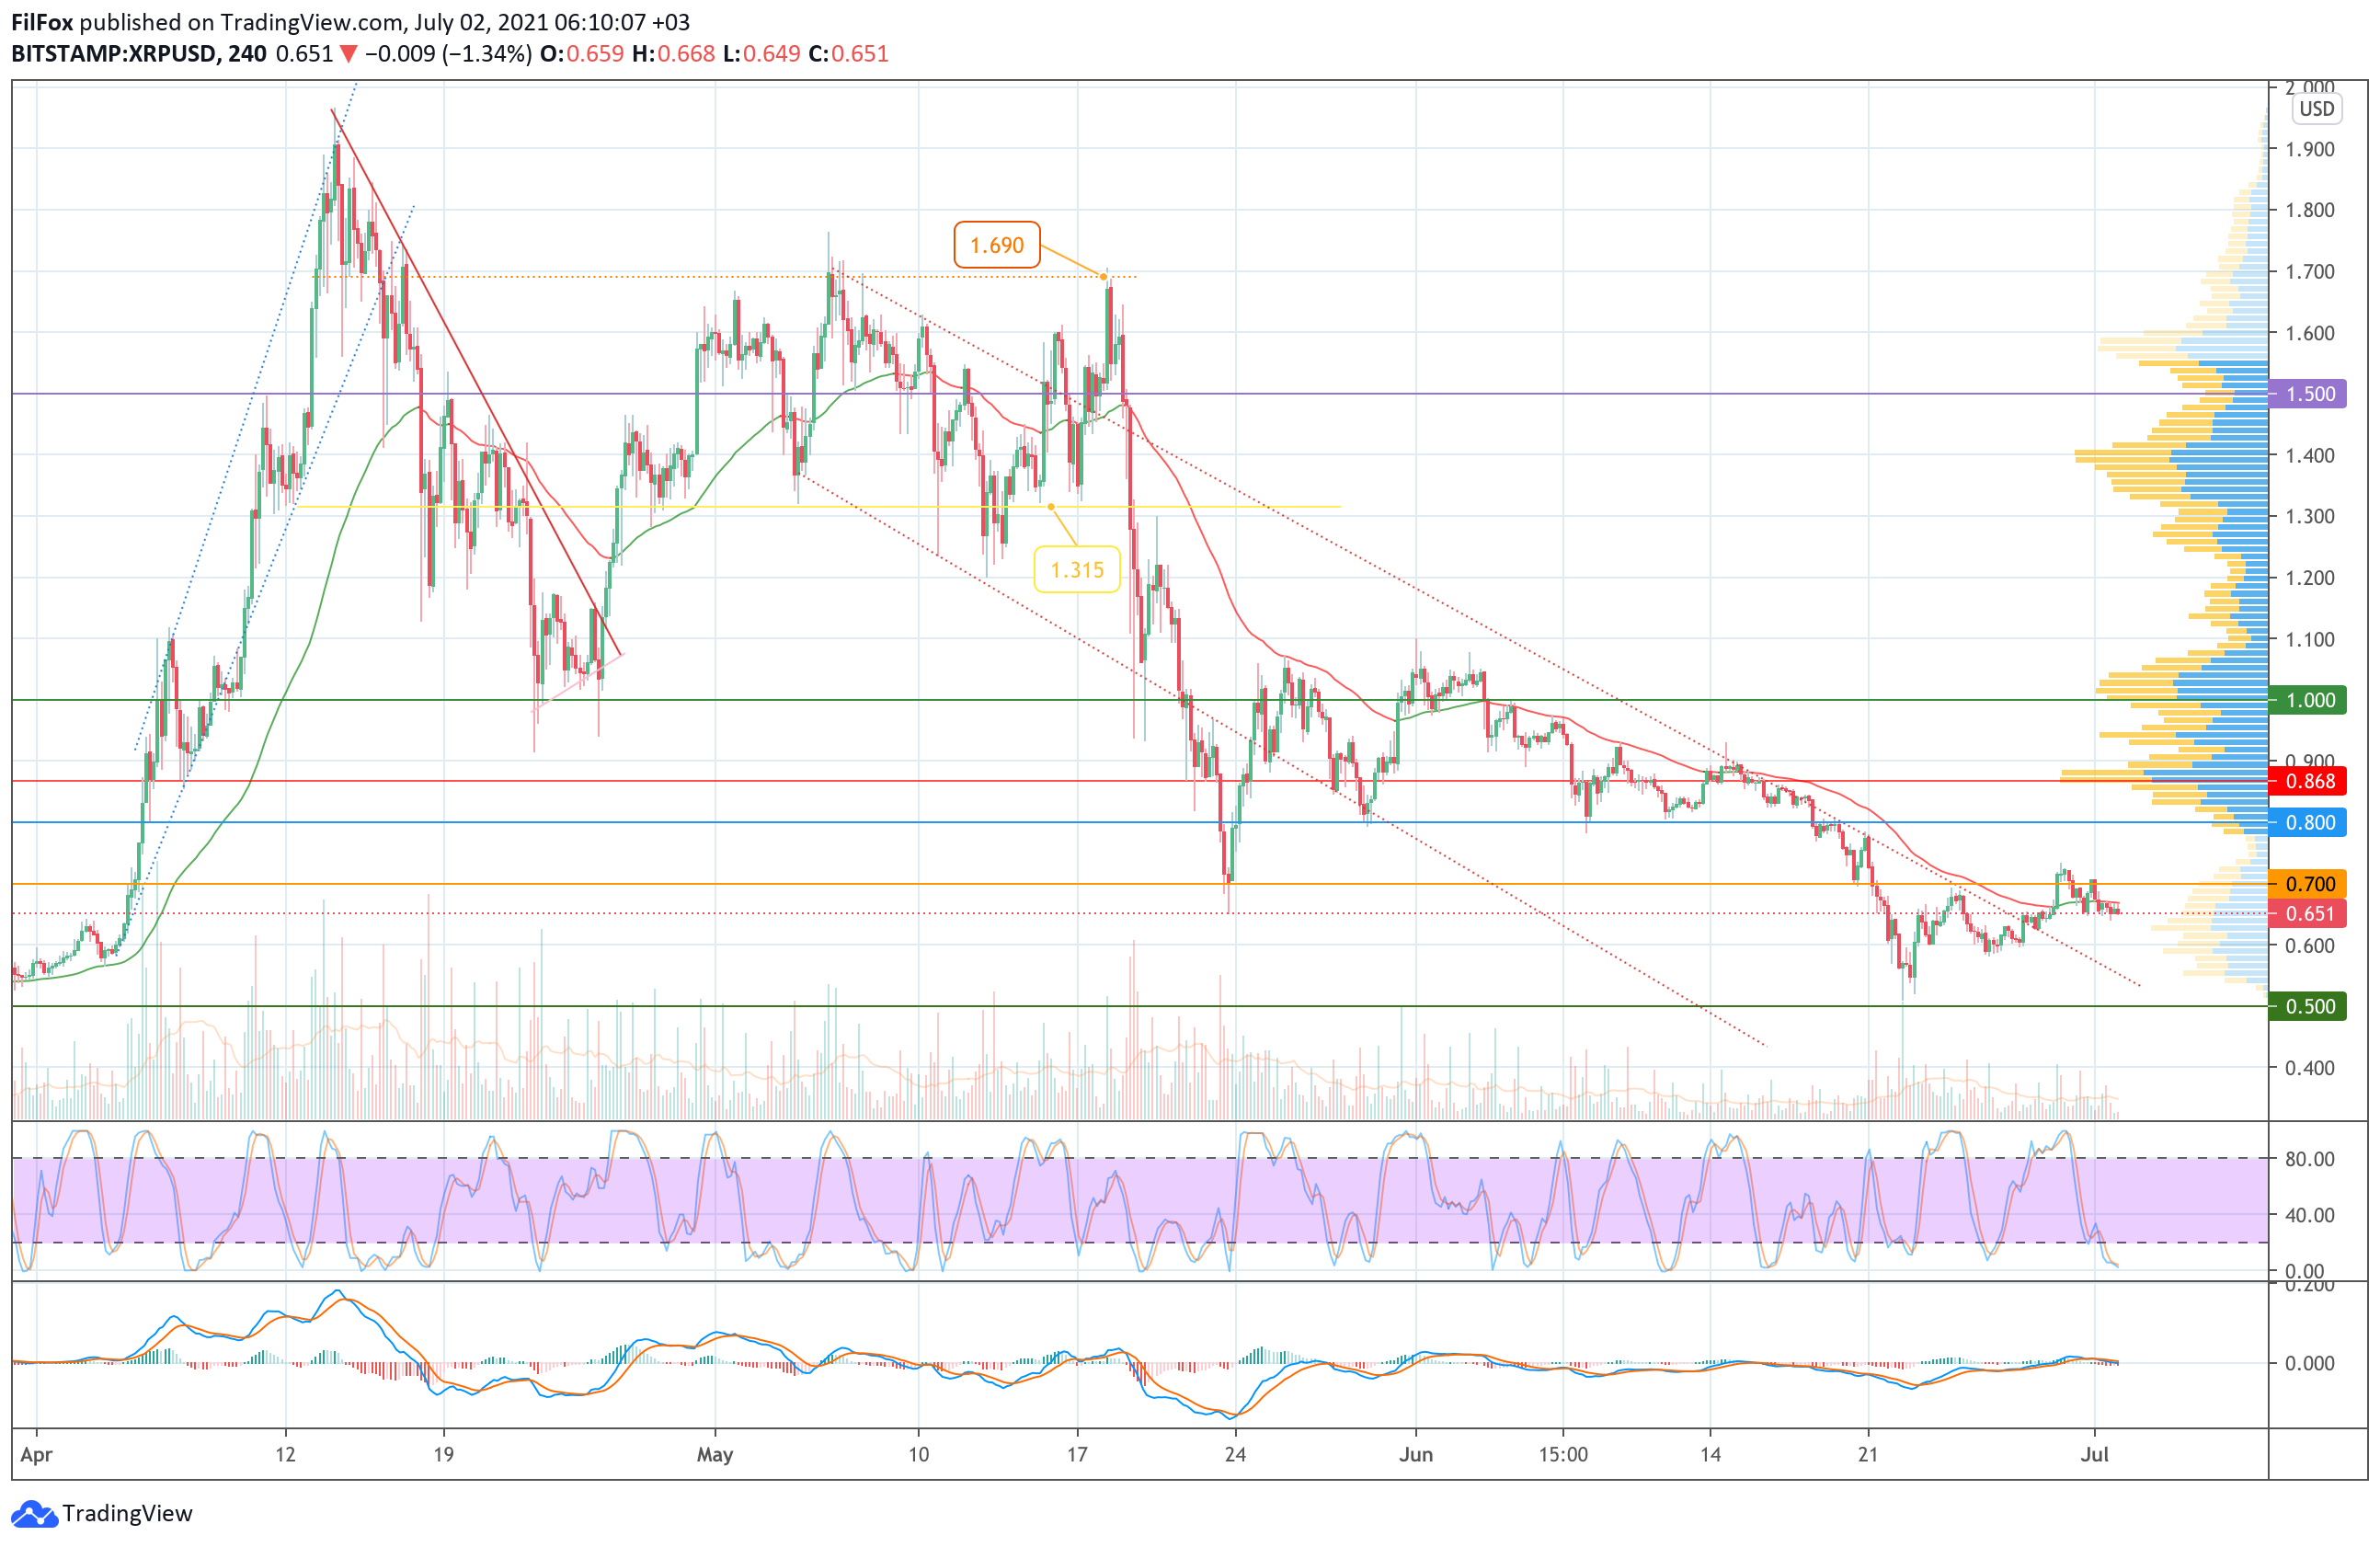 Analysis of prices for Bitcoin, Ethereum, XRP for 07/02/2021